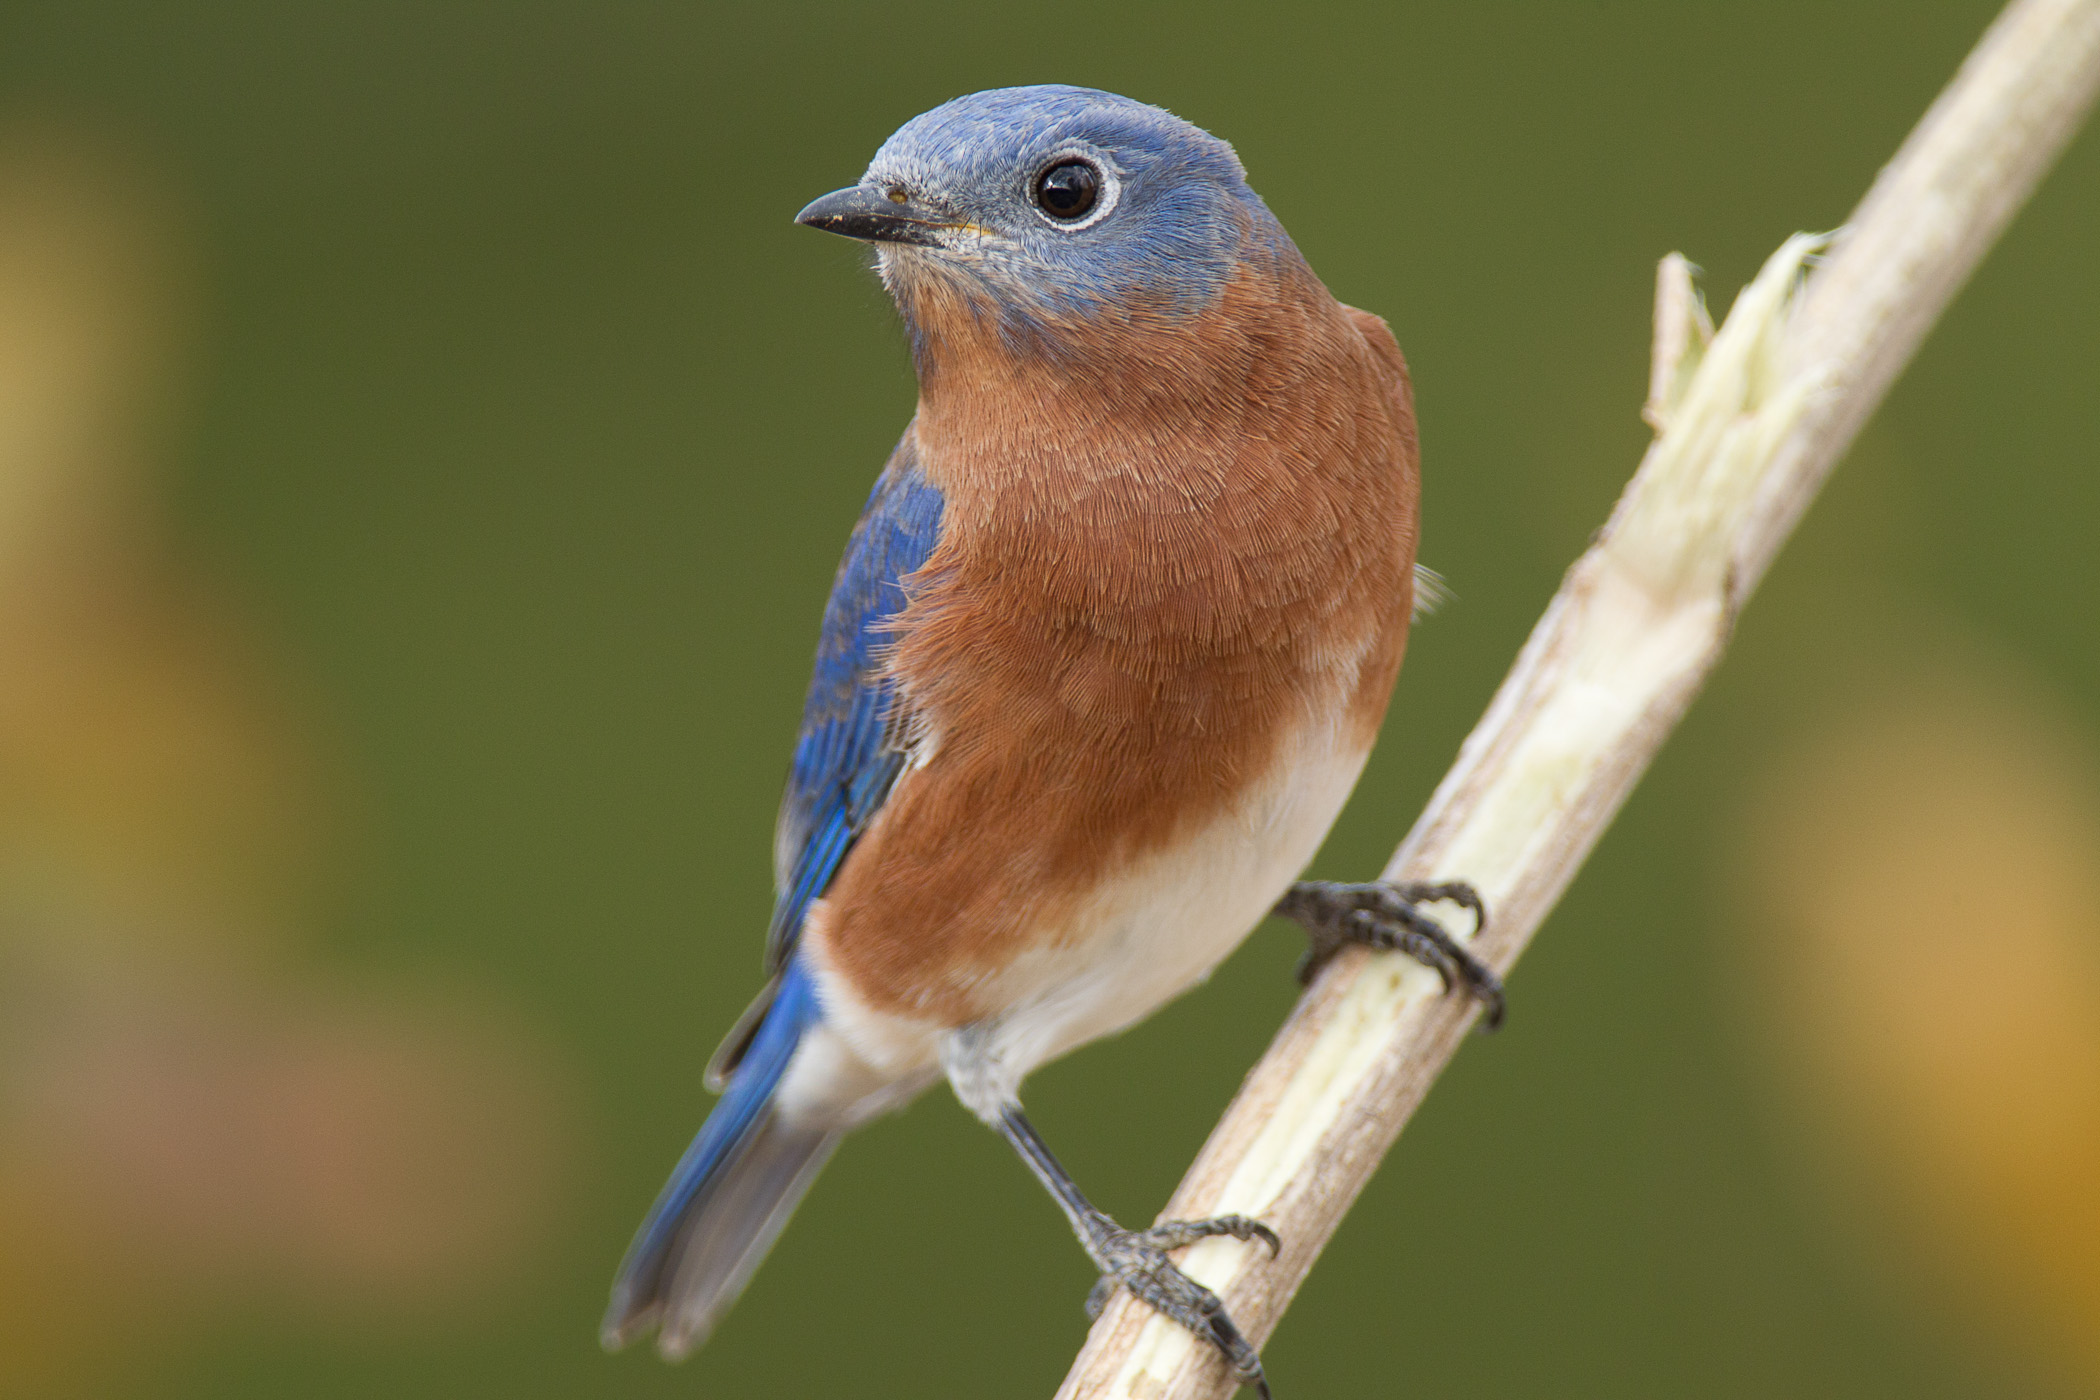 Open Missouri’s state bird, the eastern bluebird, is one of many wildlife species that can benefit from a wildlife habitat improvement plan. Photo by Noppadol Paothong, Missouri Department of Conservation.